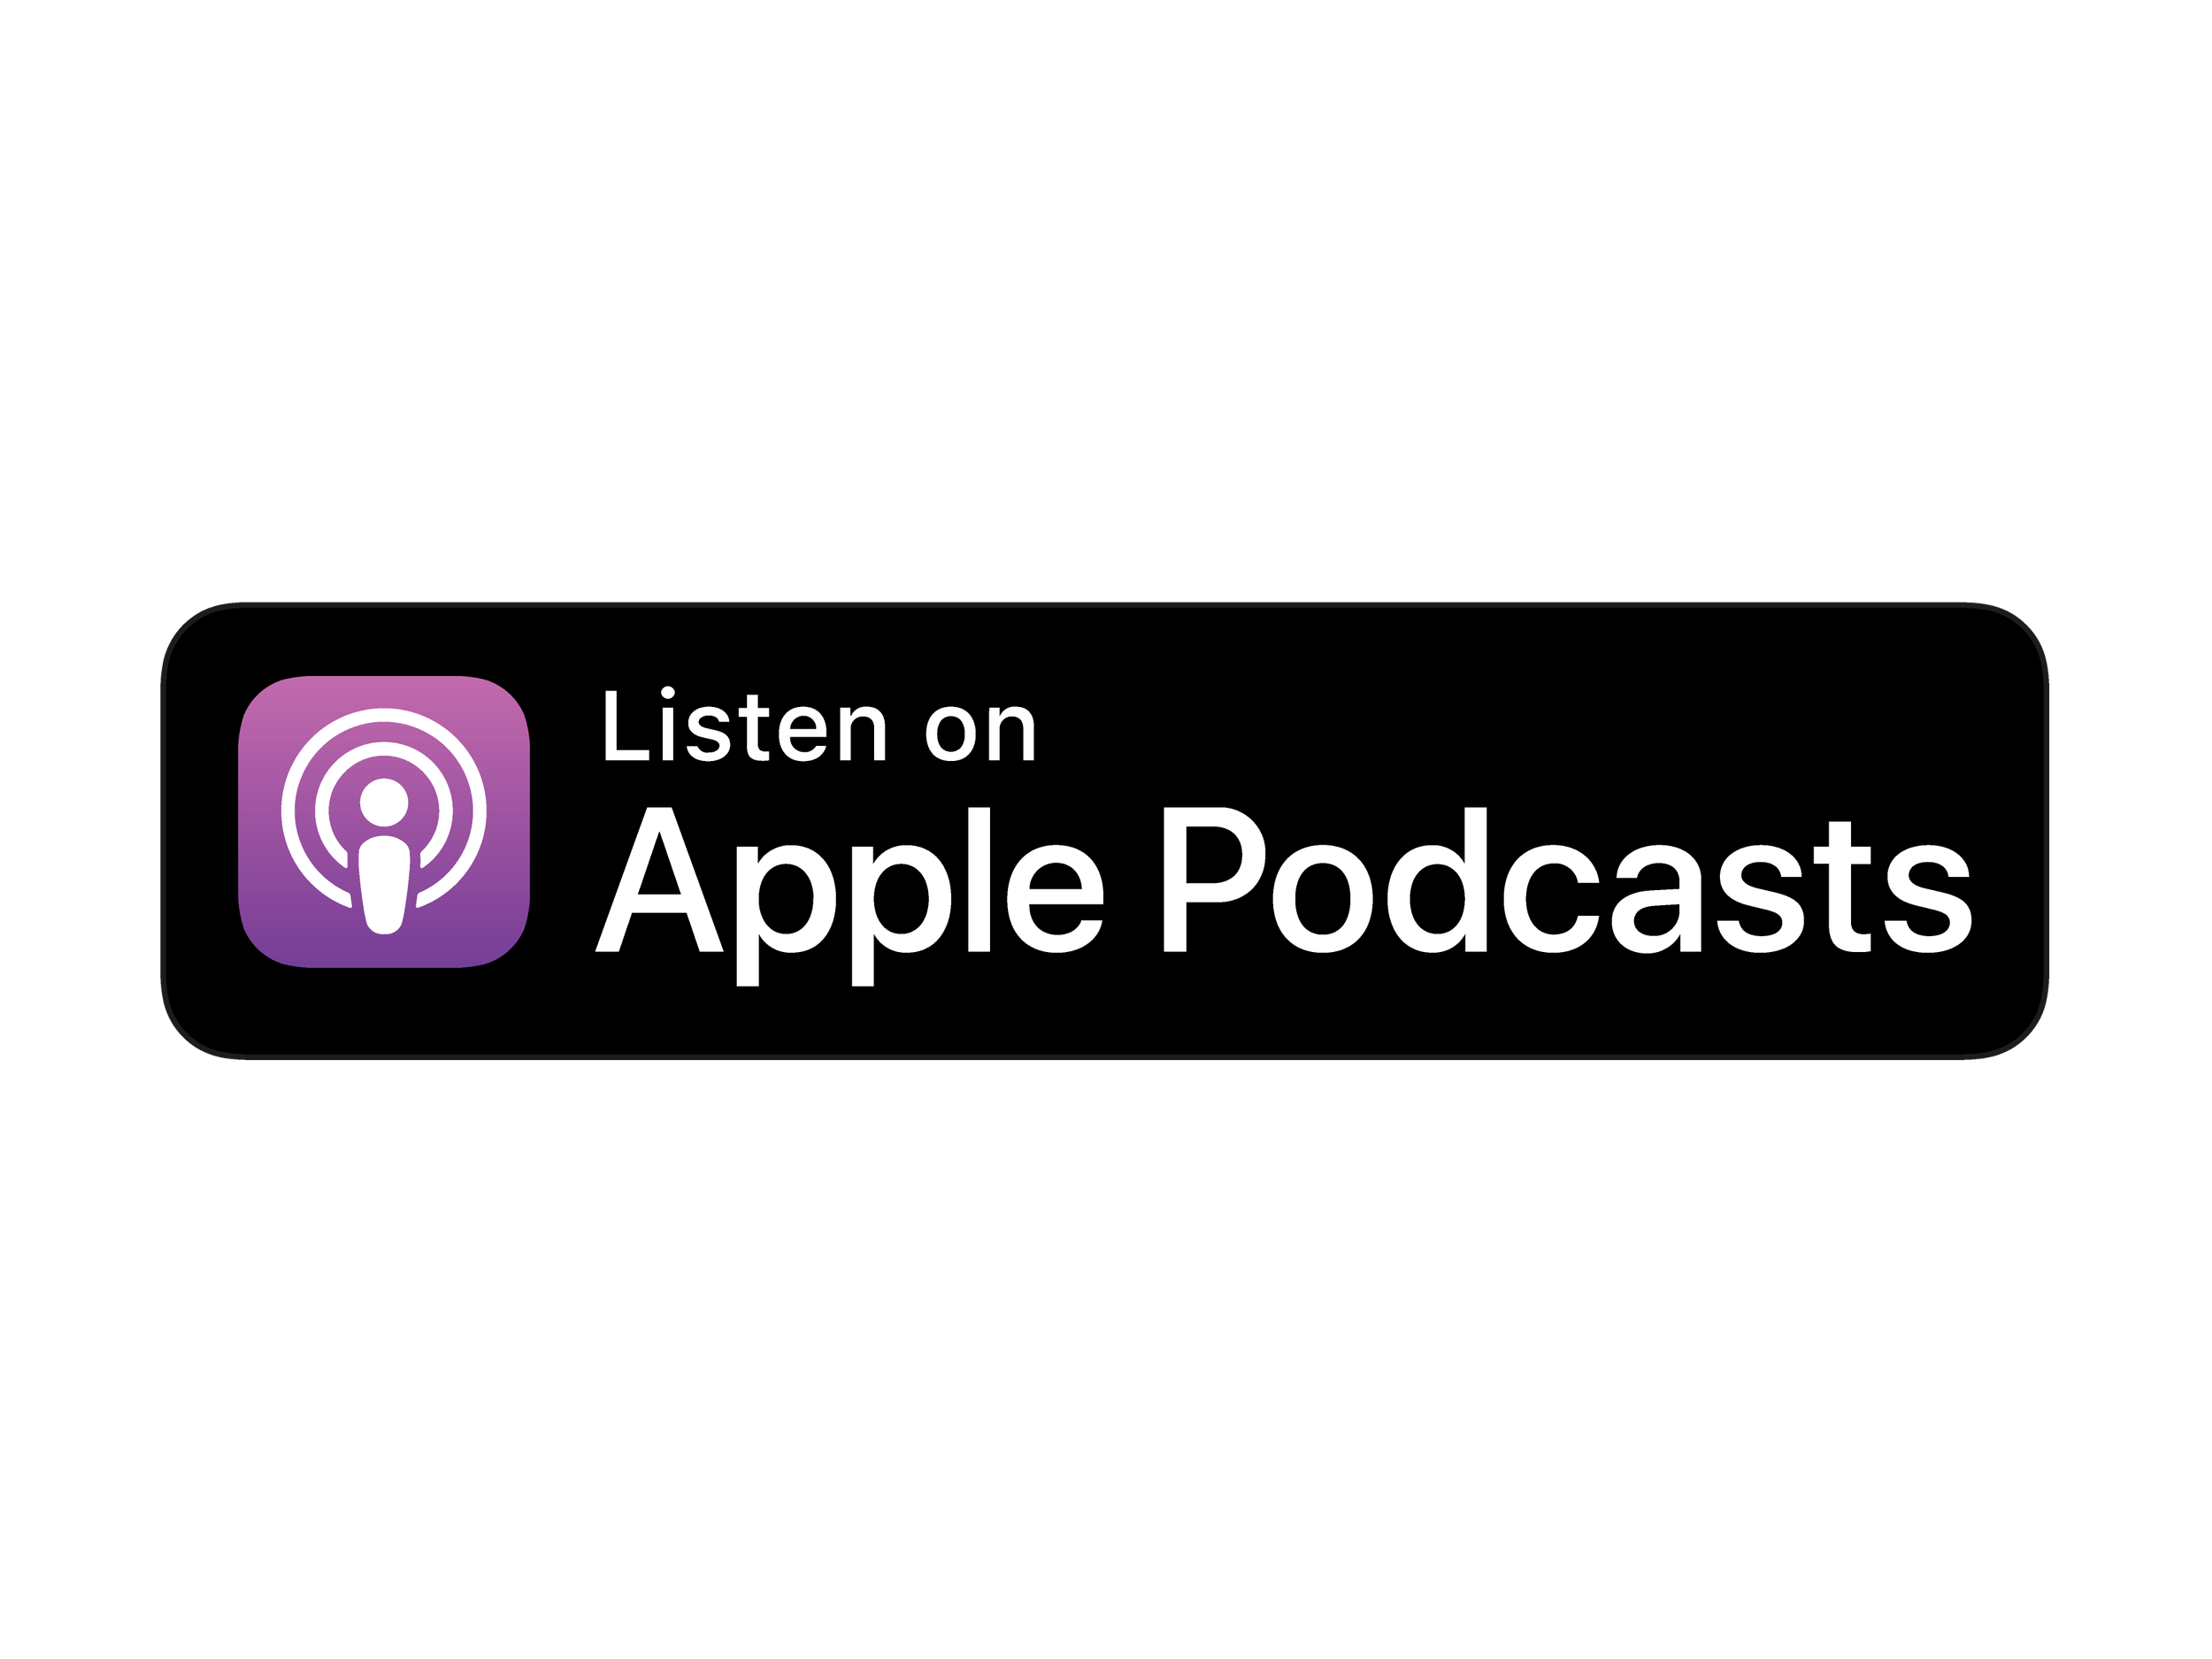 Listen on Apple Podcast (1).png